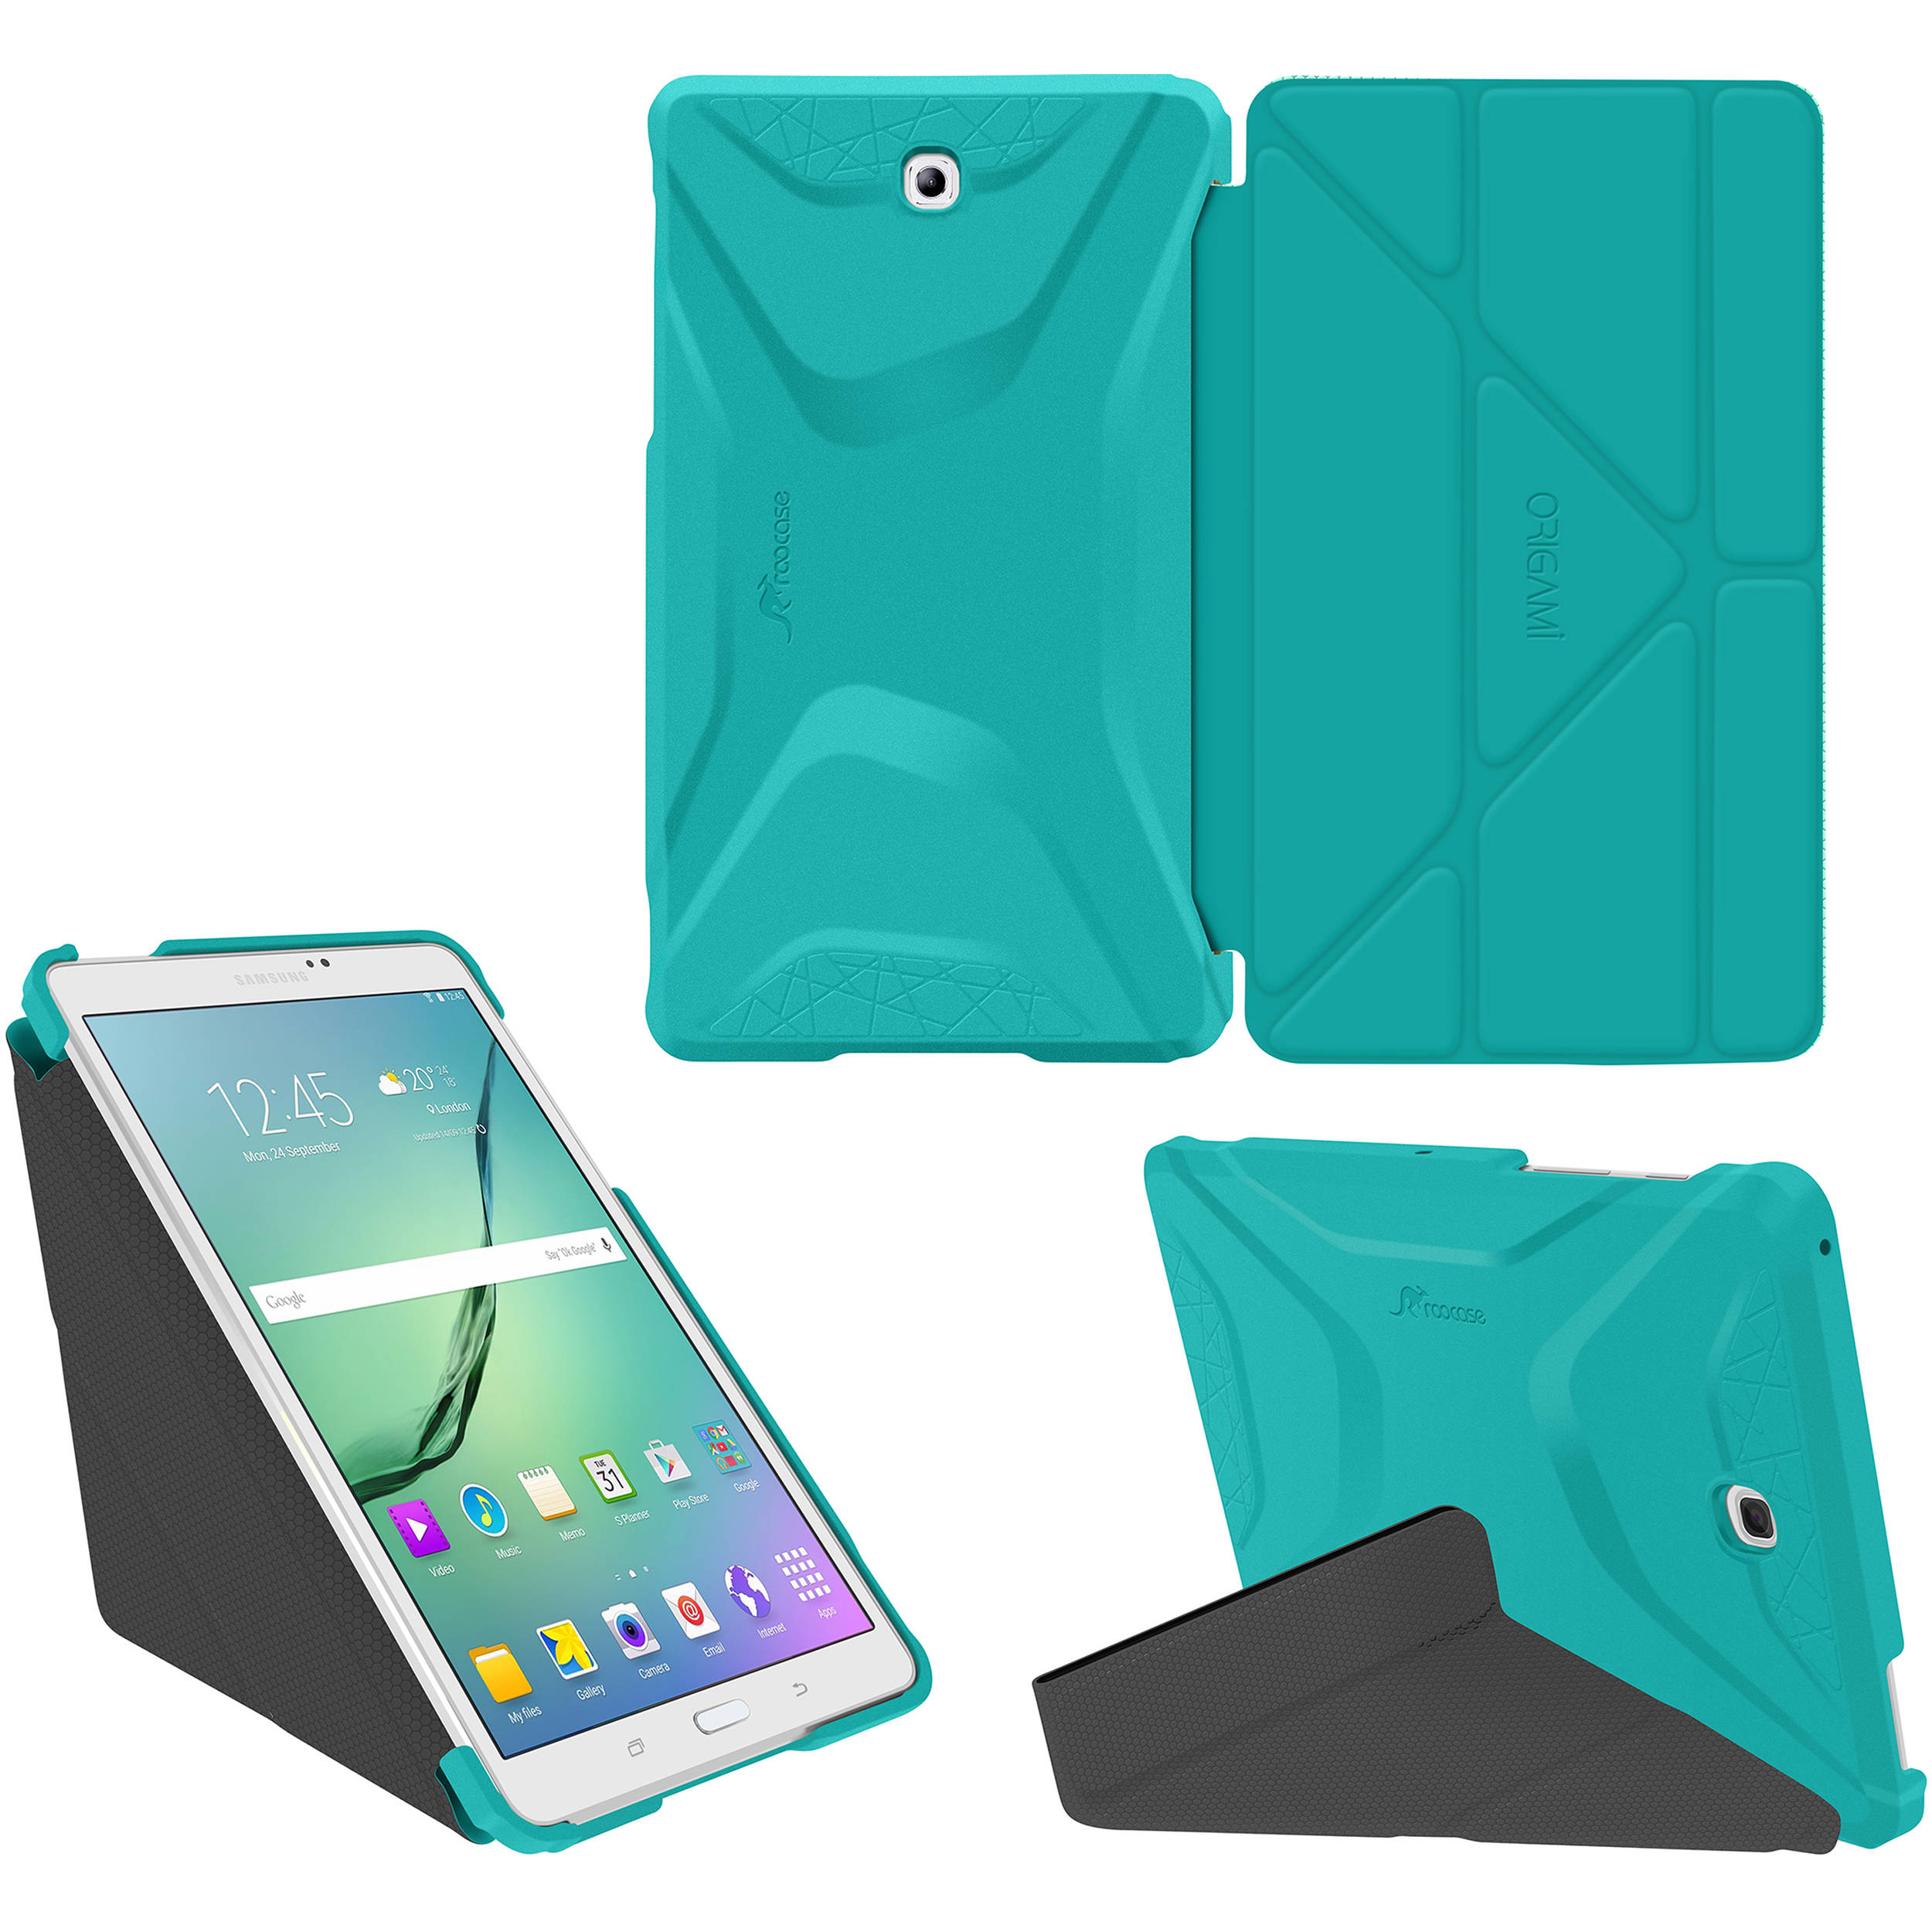 Origami Tablet Case Roocase Origami 3d Case For Samsung Galaxy Tab S2 80 Turquoise Blue Gunmetal Gray